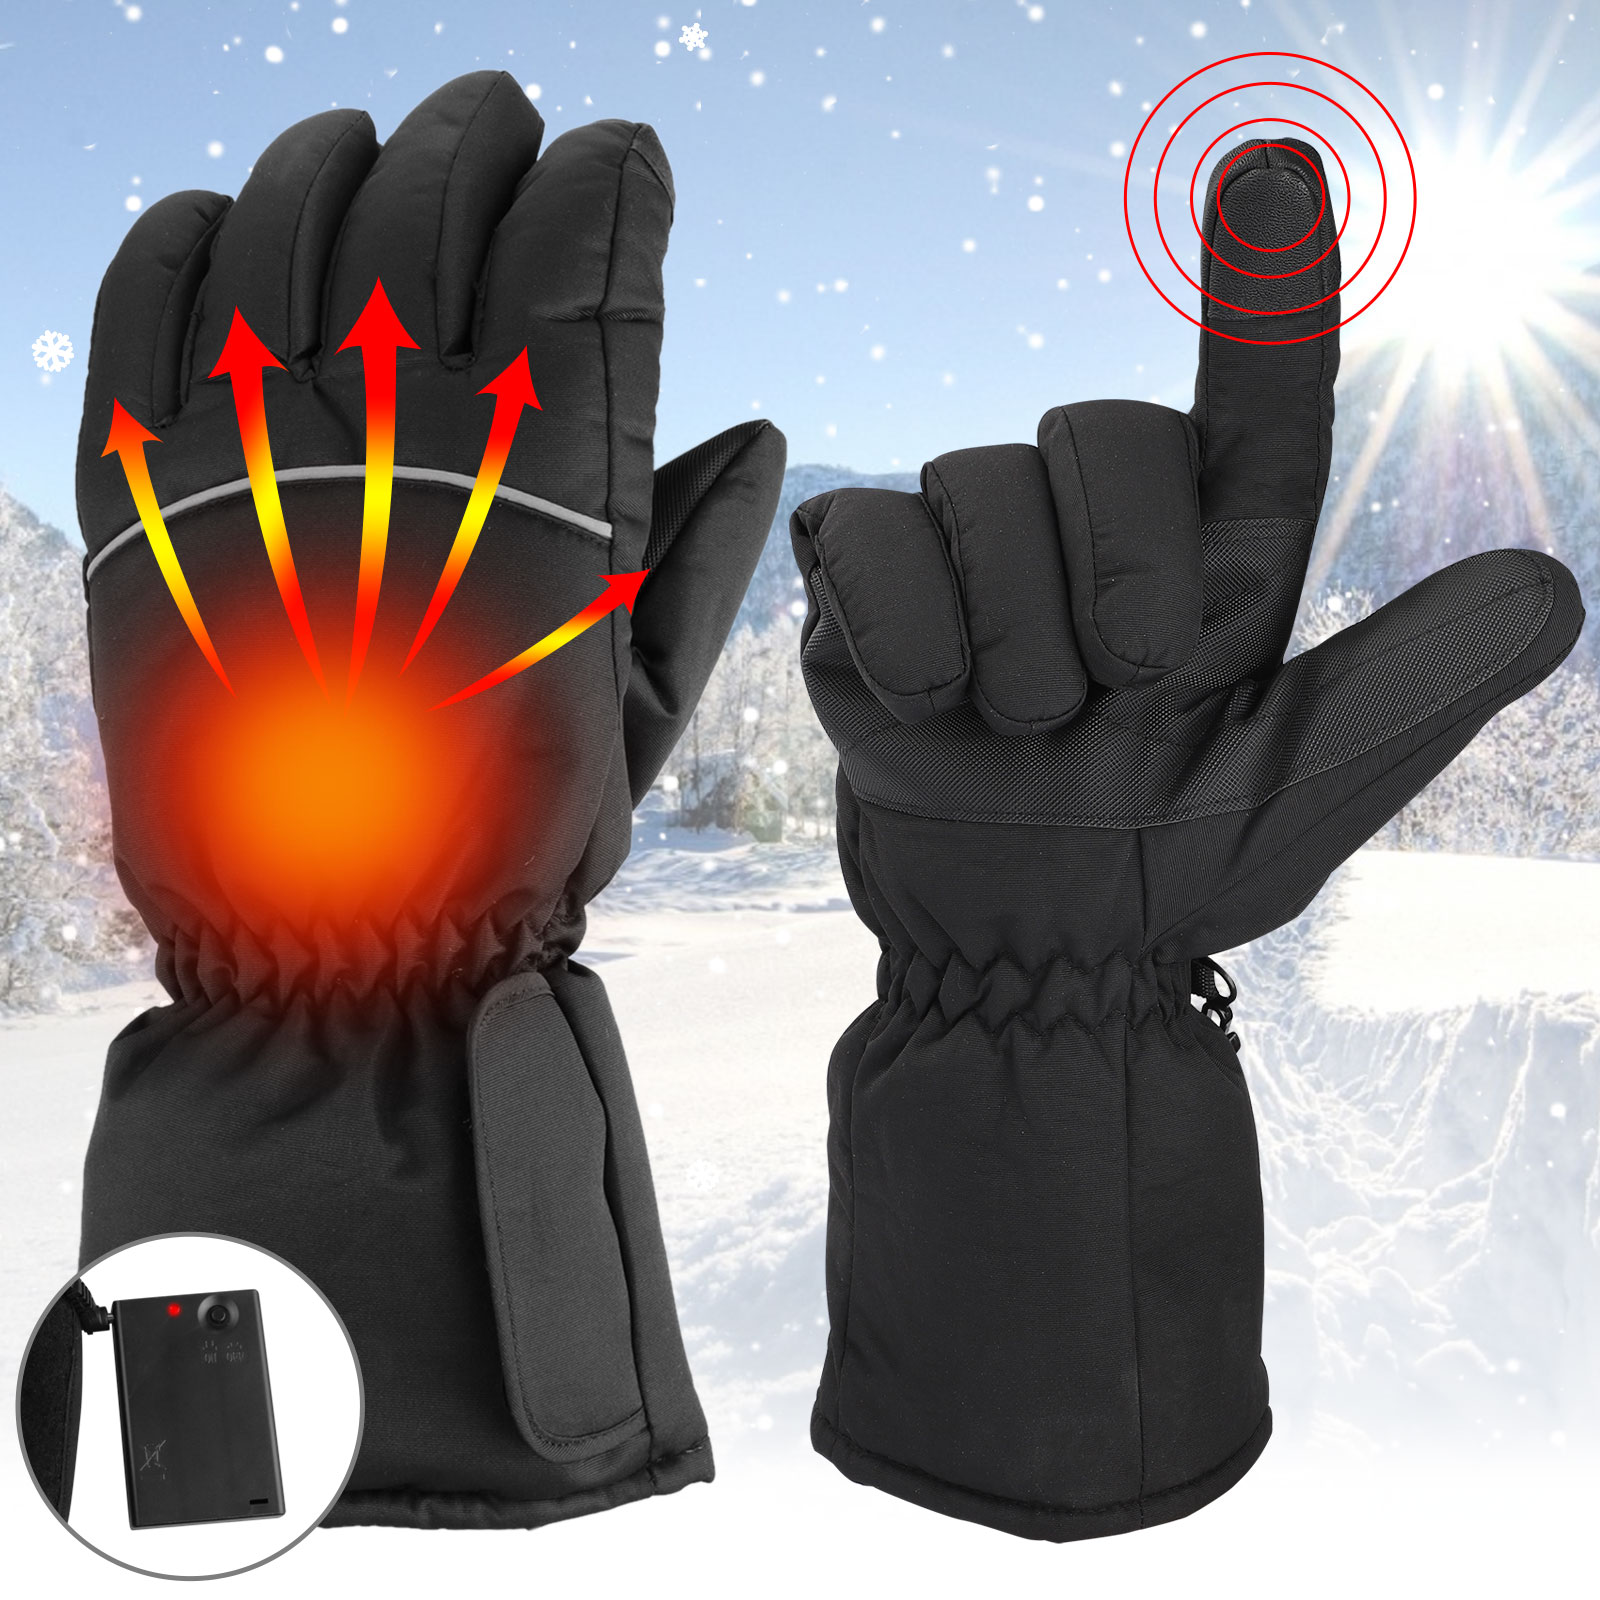 Lixada Battery Heated Gloves Electric Operated Thermal Gloves Hand Warmer Gloves for Men Women Rechargeable Heated Gloves for Climbing Fishing Ski Hiking Cycling Motorcycle,Black